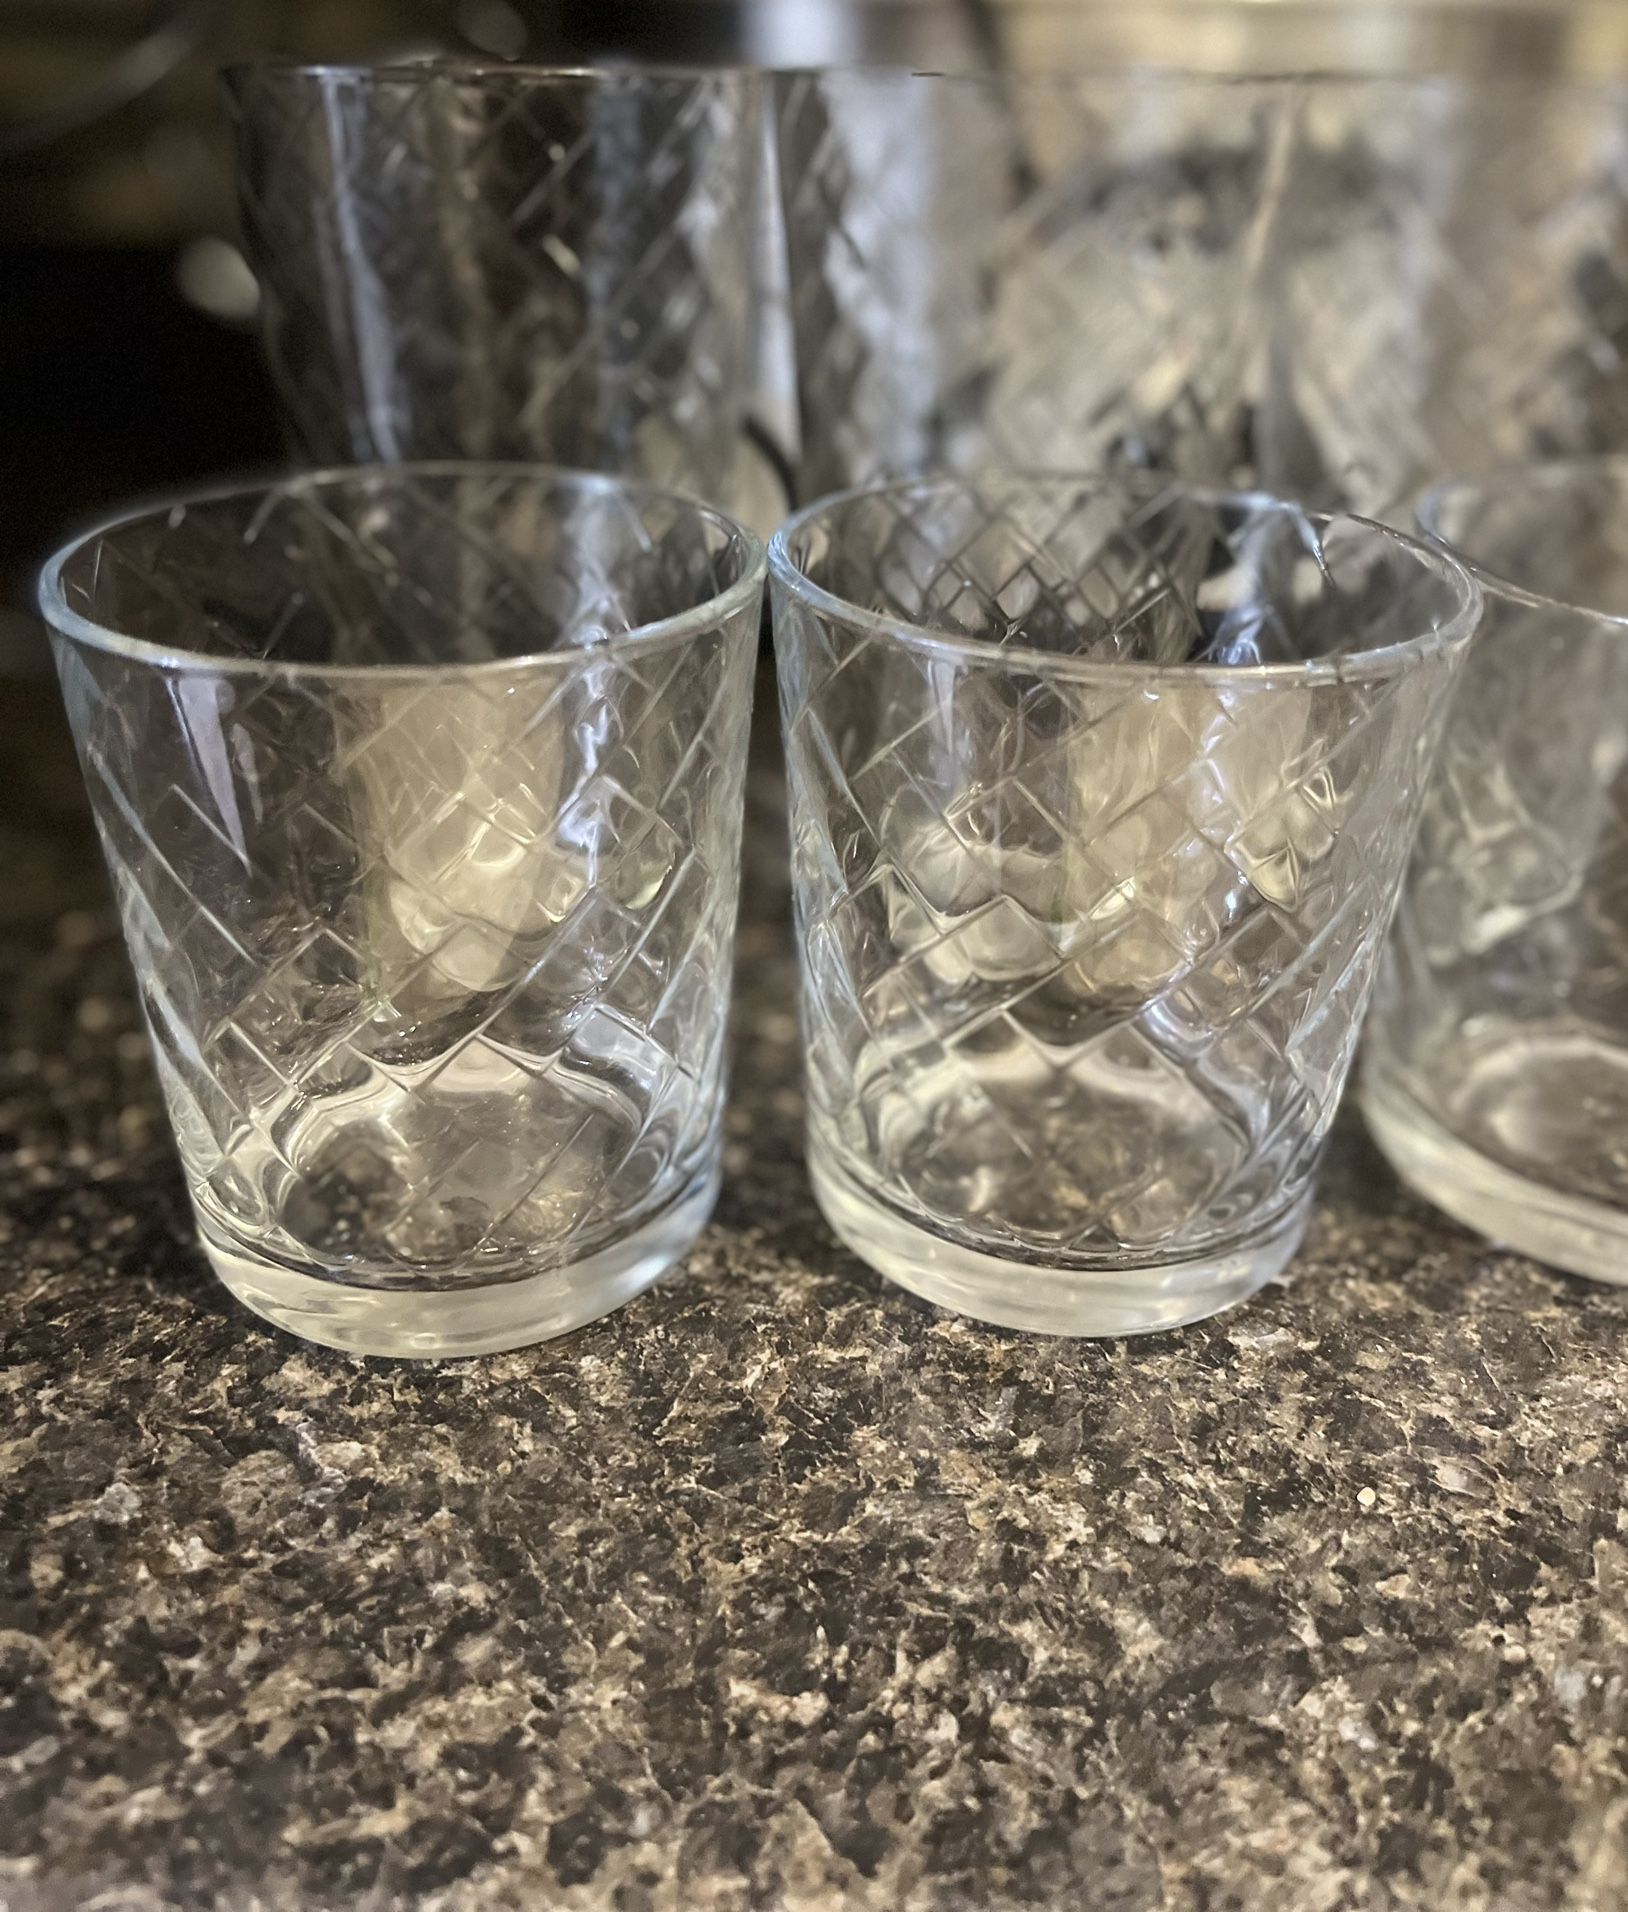 Drinking Glassware Cups